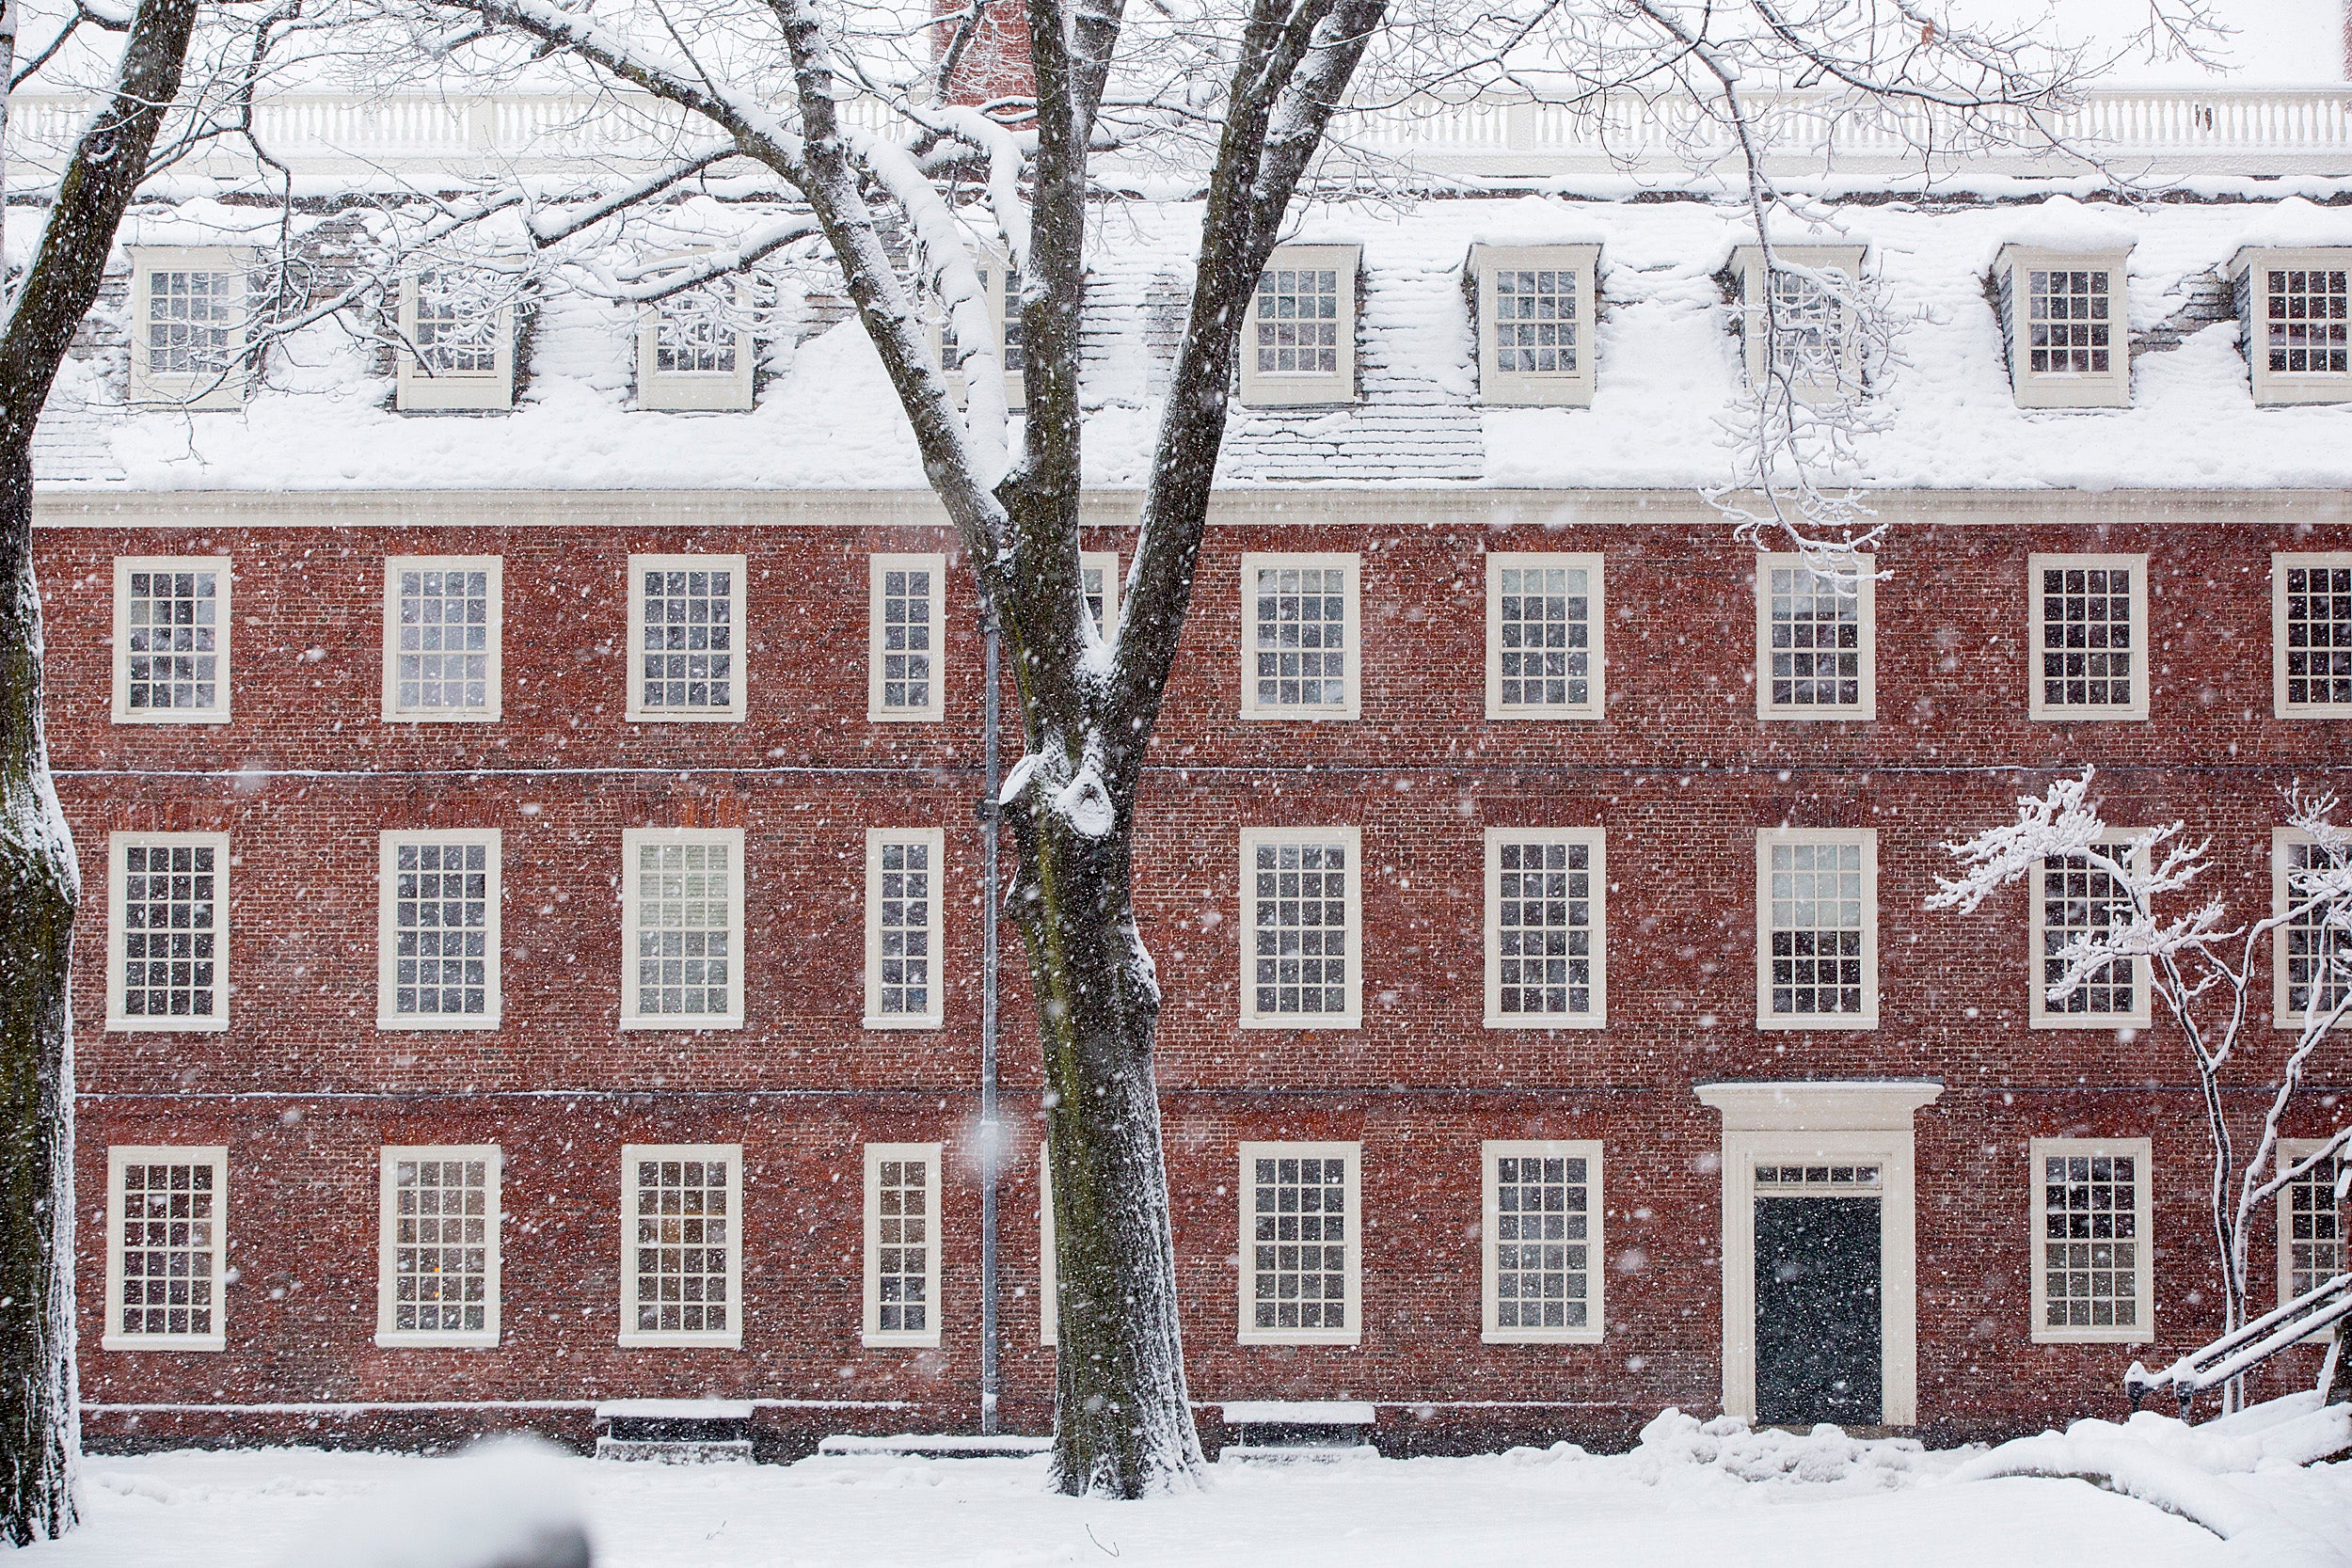 Mass hall in the snow.